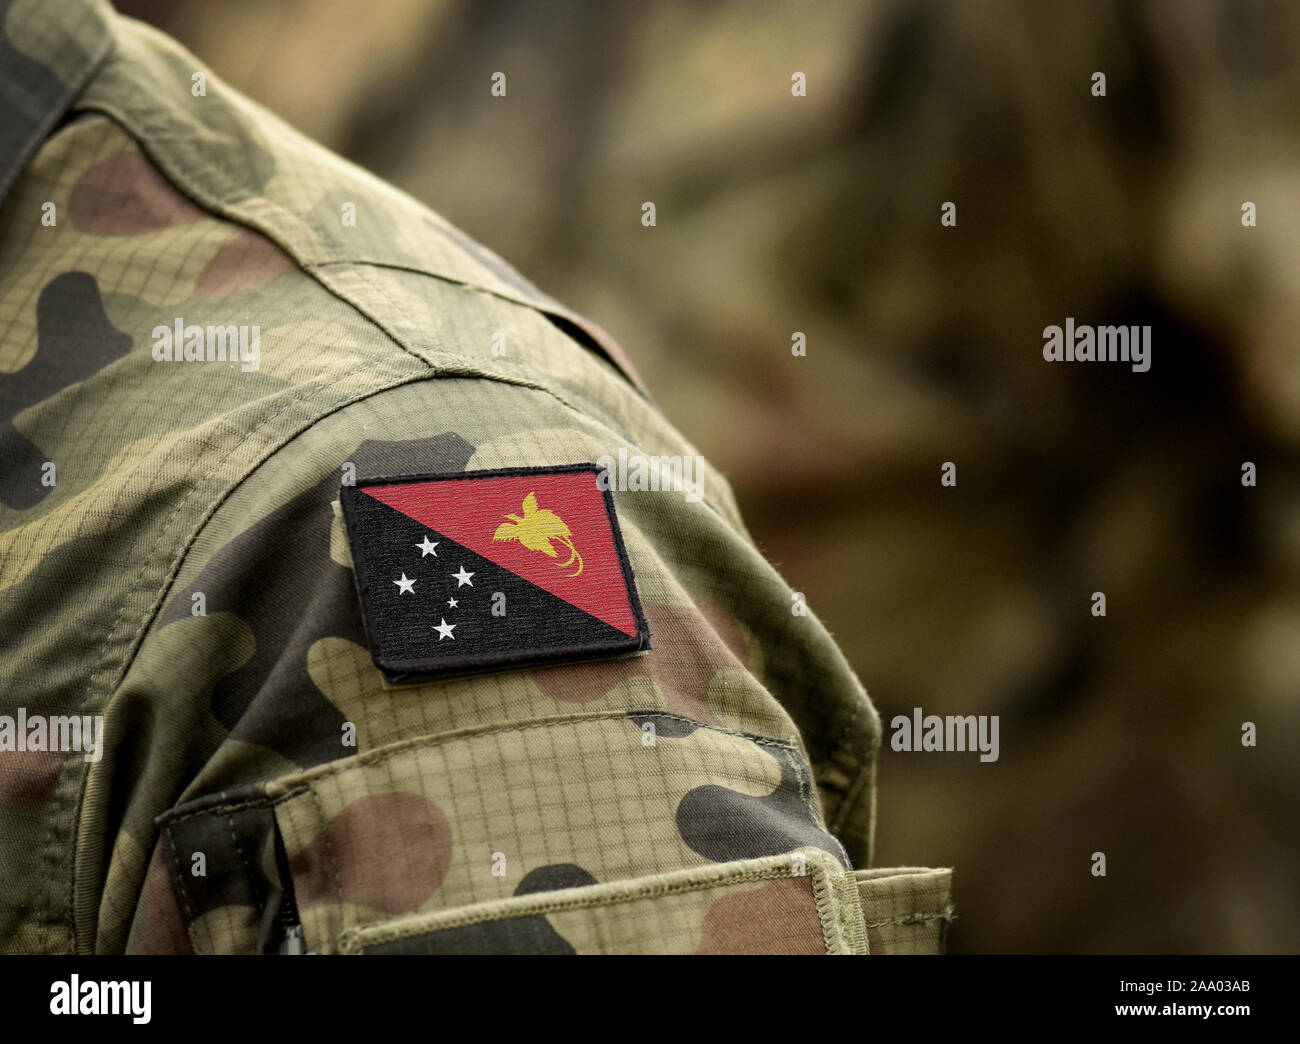 Flag of Papua New Guinea on military uniform. Army, armed forces, soldiers. Collage. Stock Photo